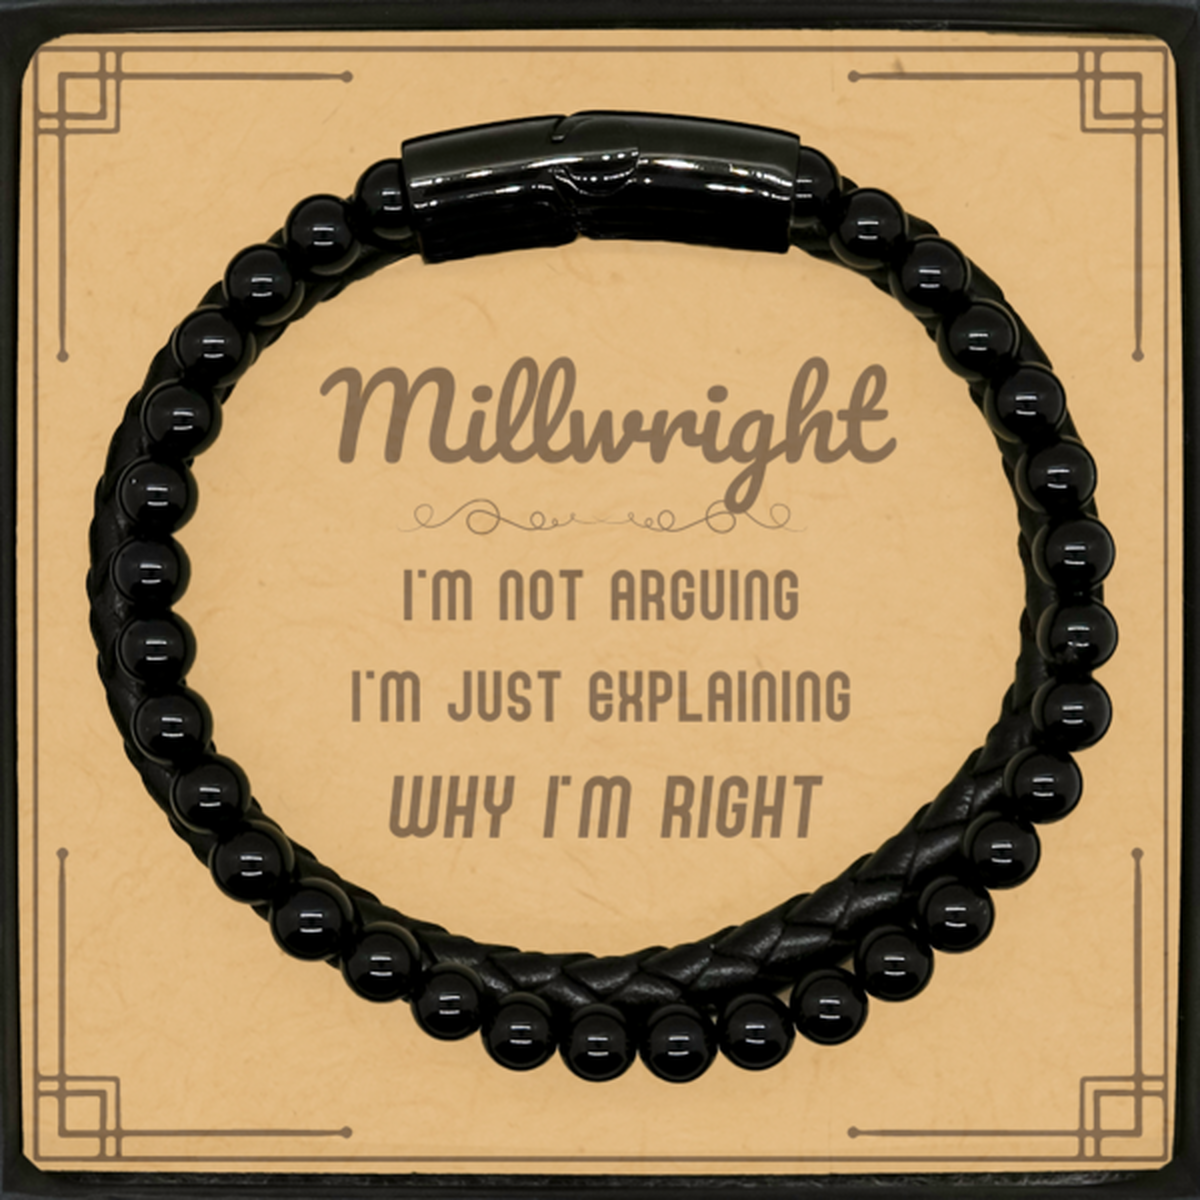 Millwright I'm not Arguing. I'm Just Explaining Why I'm RIGHT Stone Leather Bracelets, Funny Saying Quote Millwright Gifts For Millwright Message Card Graduation Birthday Christmas Gifts for Men Women Coworker